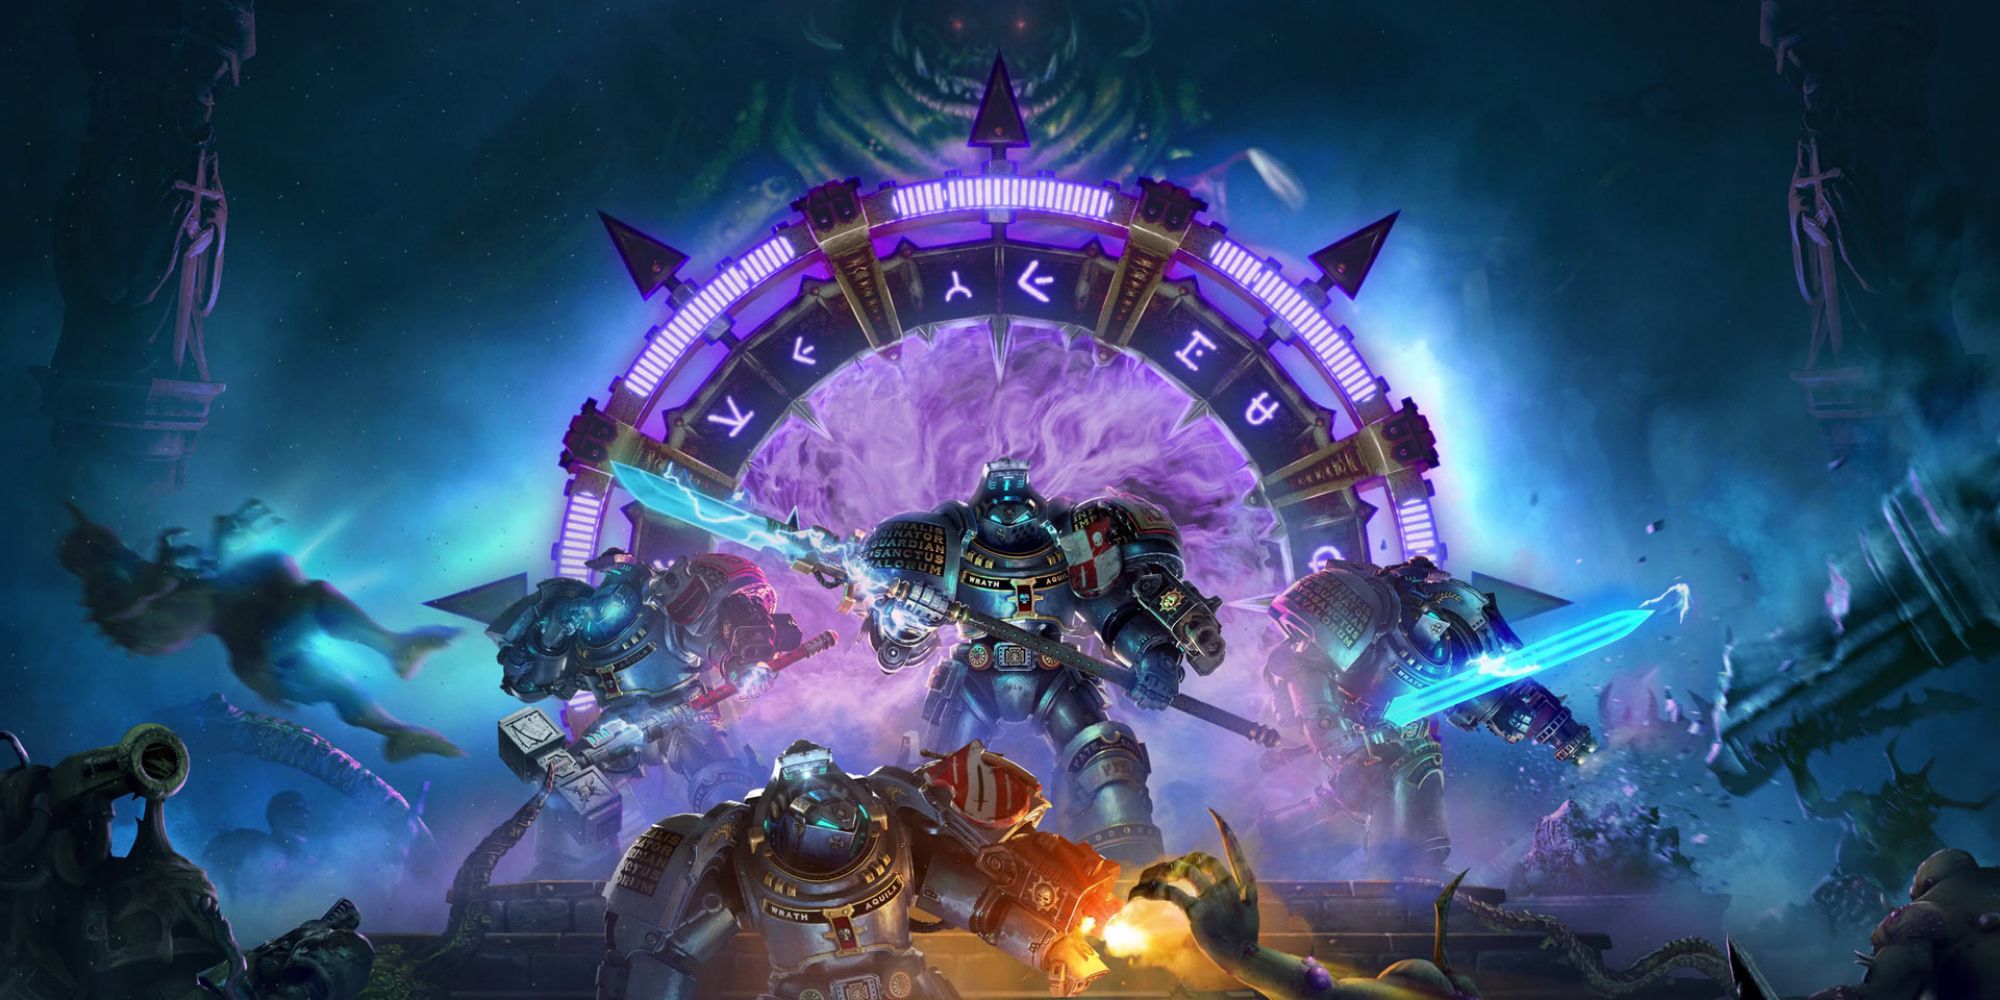 The cover art for Warhammer 40,000: Chaos Gate - Daemonhunters